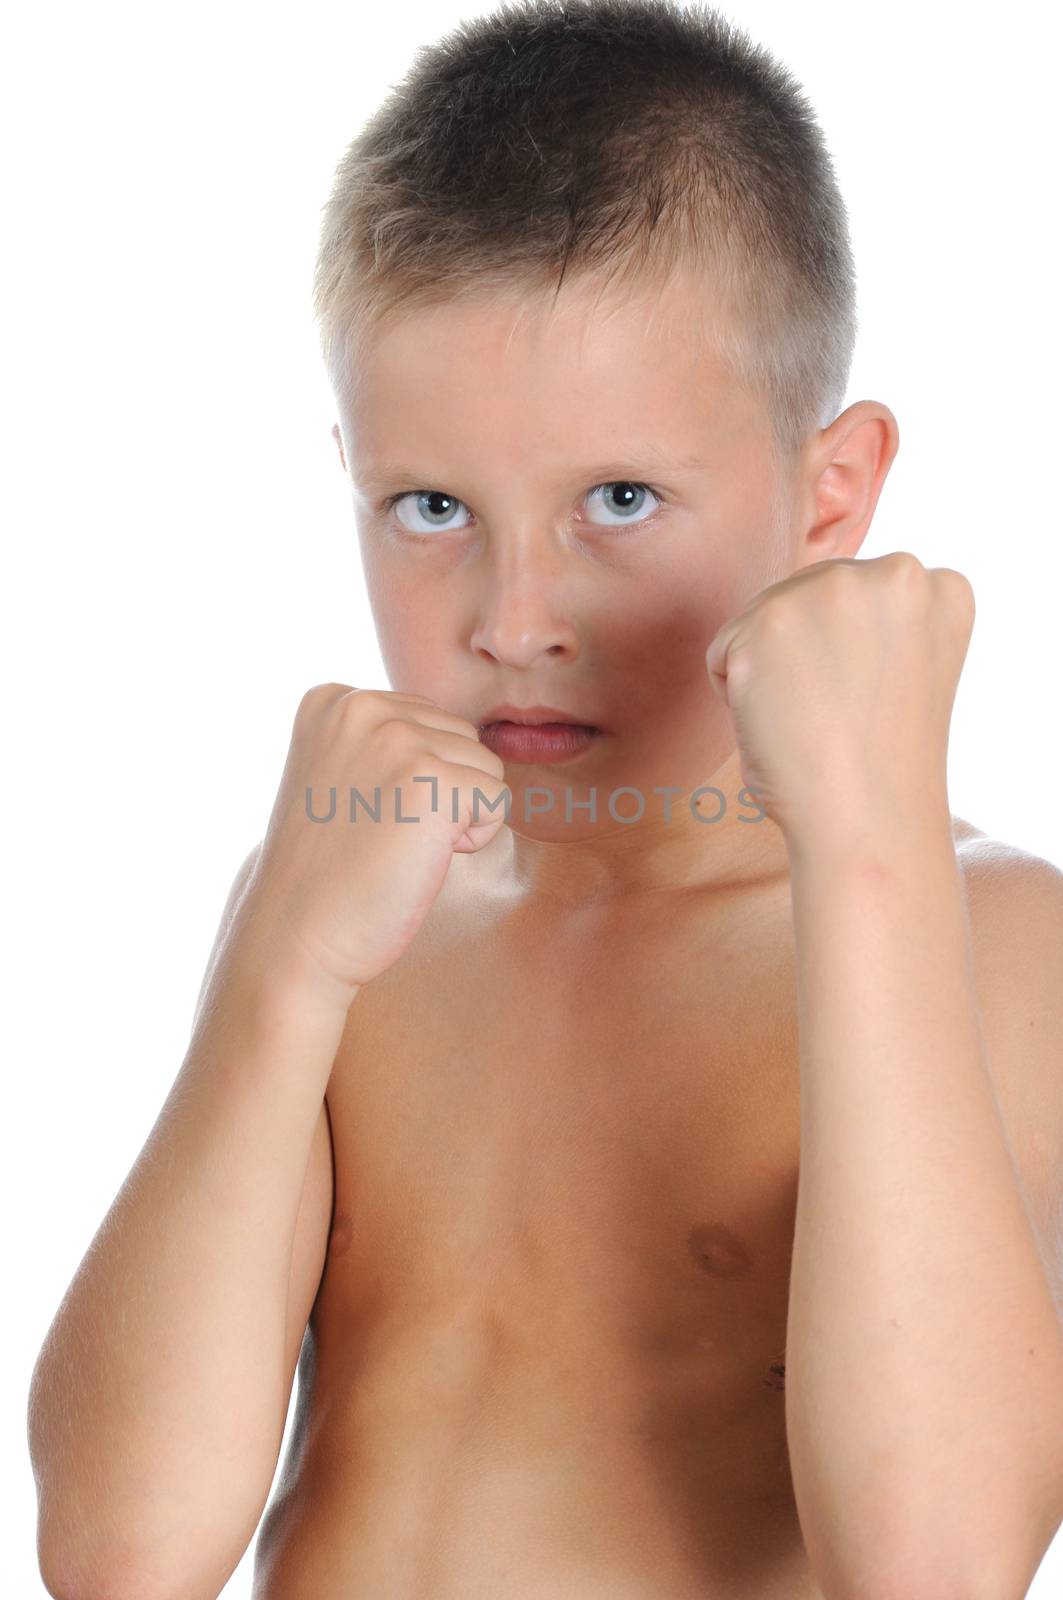 Serious and determined young boy wearing like boxing gloves and looking at the camera. Isolated on white